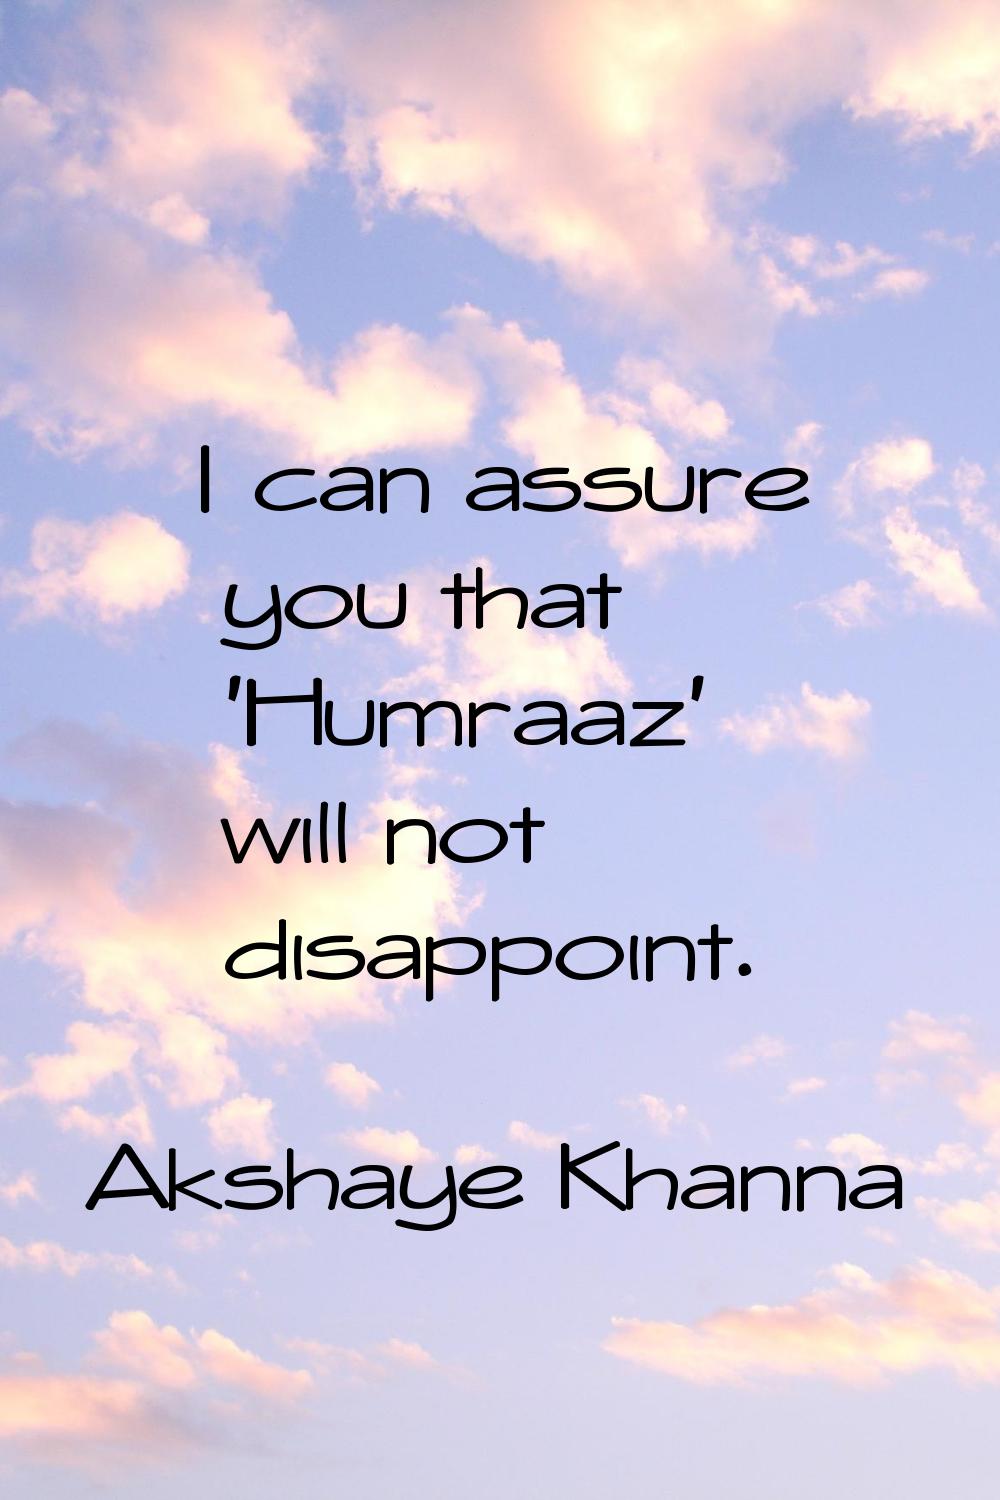 I can assure you that 'Humraaz' will not disappoint.